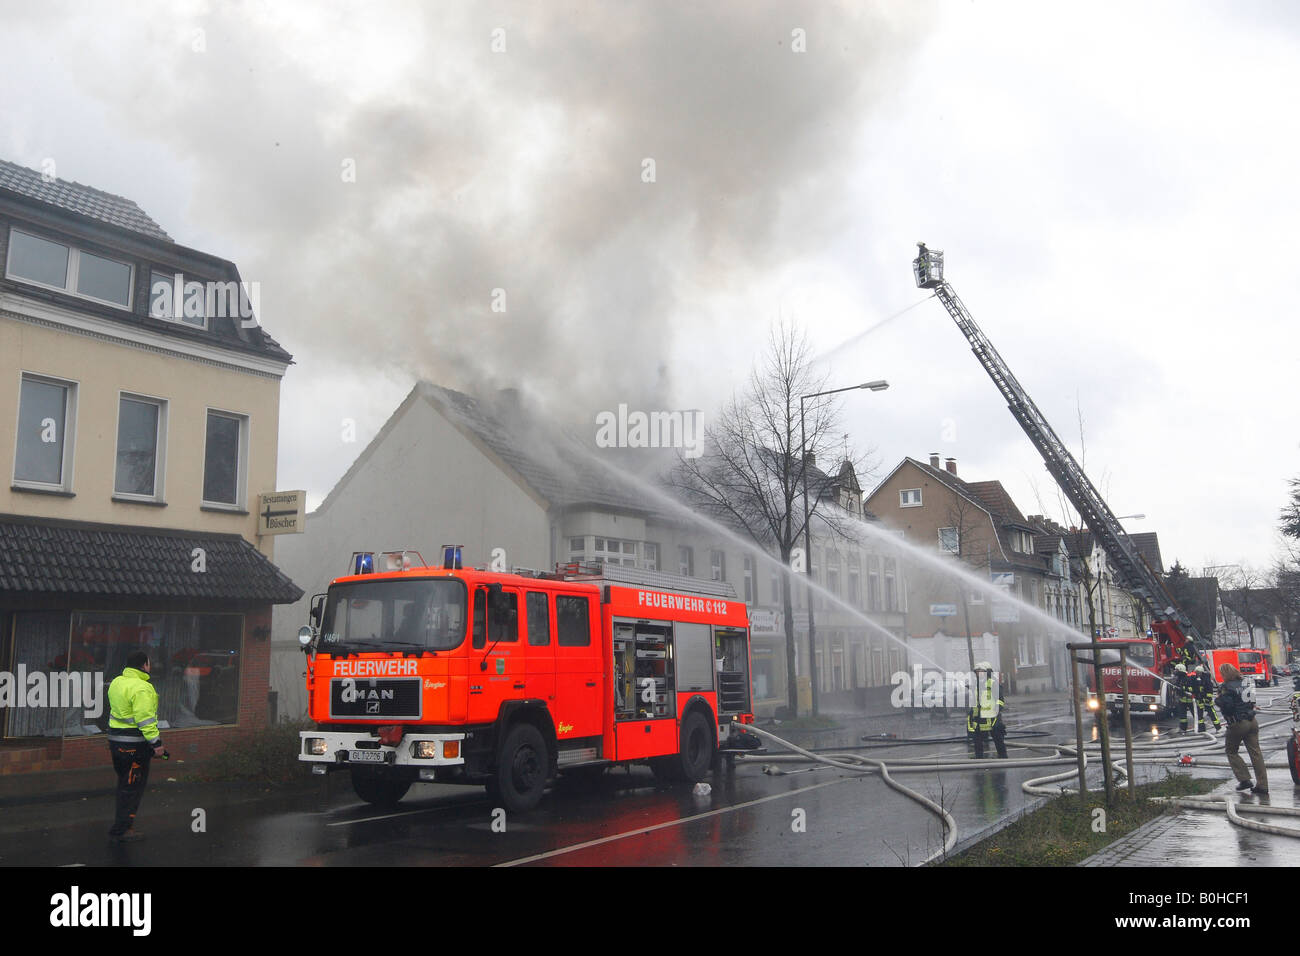 Firefighters fighting a roof fire using high pressure hoses and a mobile ladder in Bergisch Gladbach, North Rhine-Westphalia, G Stock Photo